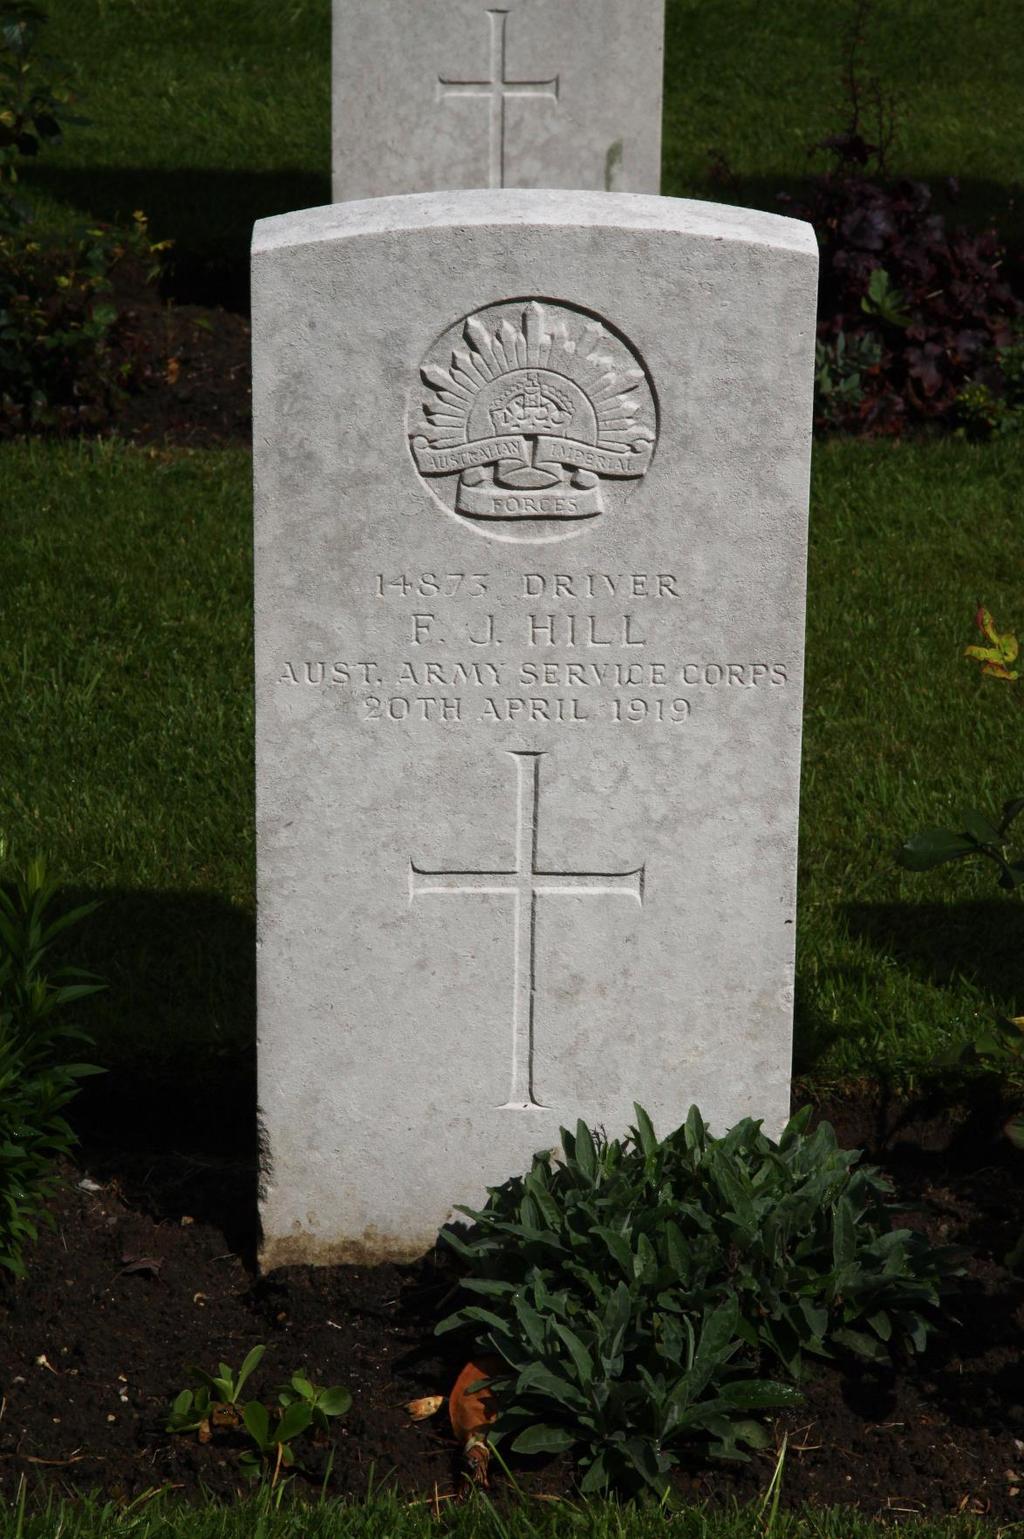 Photo of Driver F. J. Hill s CWGC headstone in St.